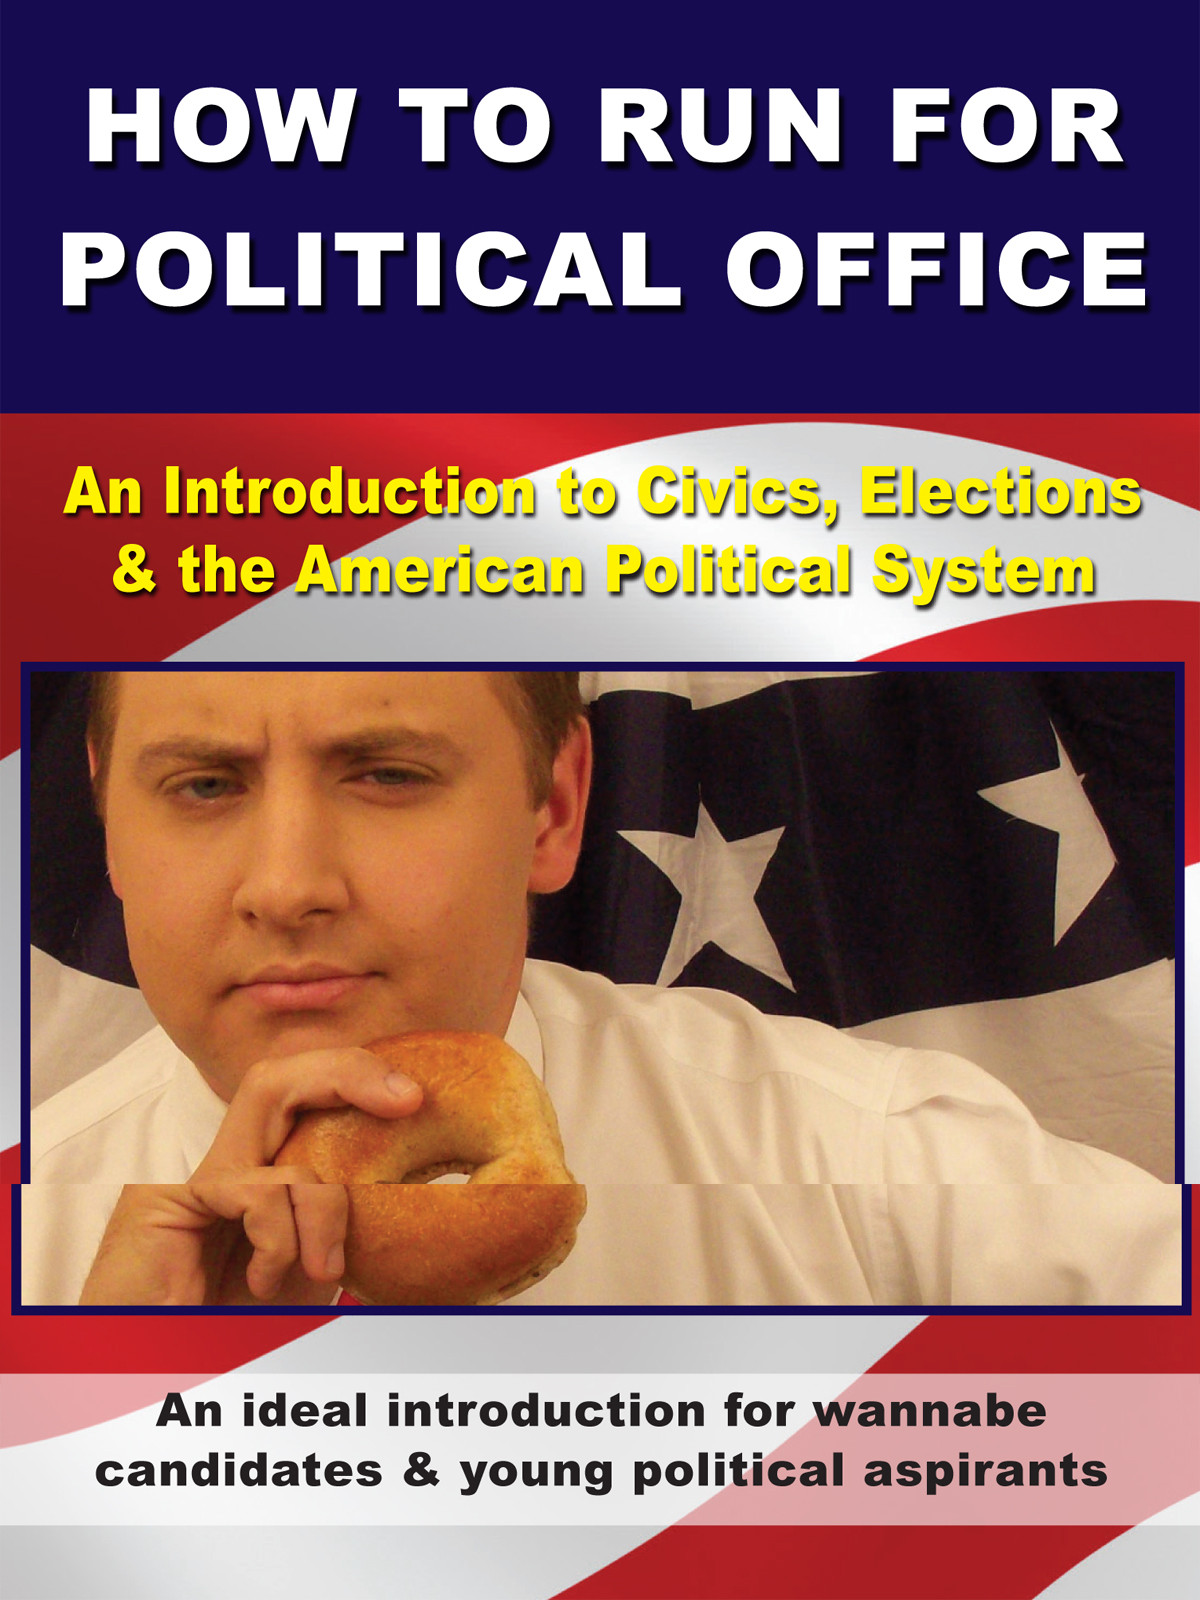 K4040 - How to Run for Political Office An Introduction to Civics, Elections & the American Political System